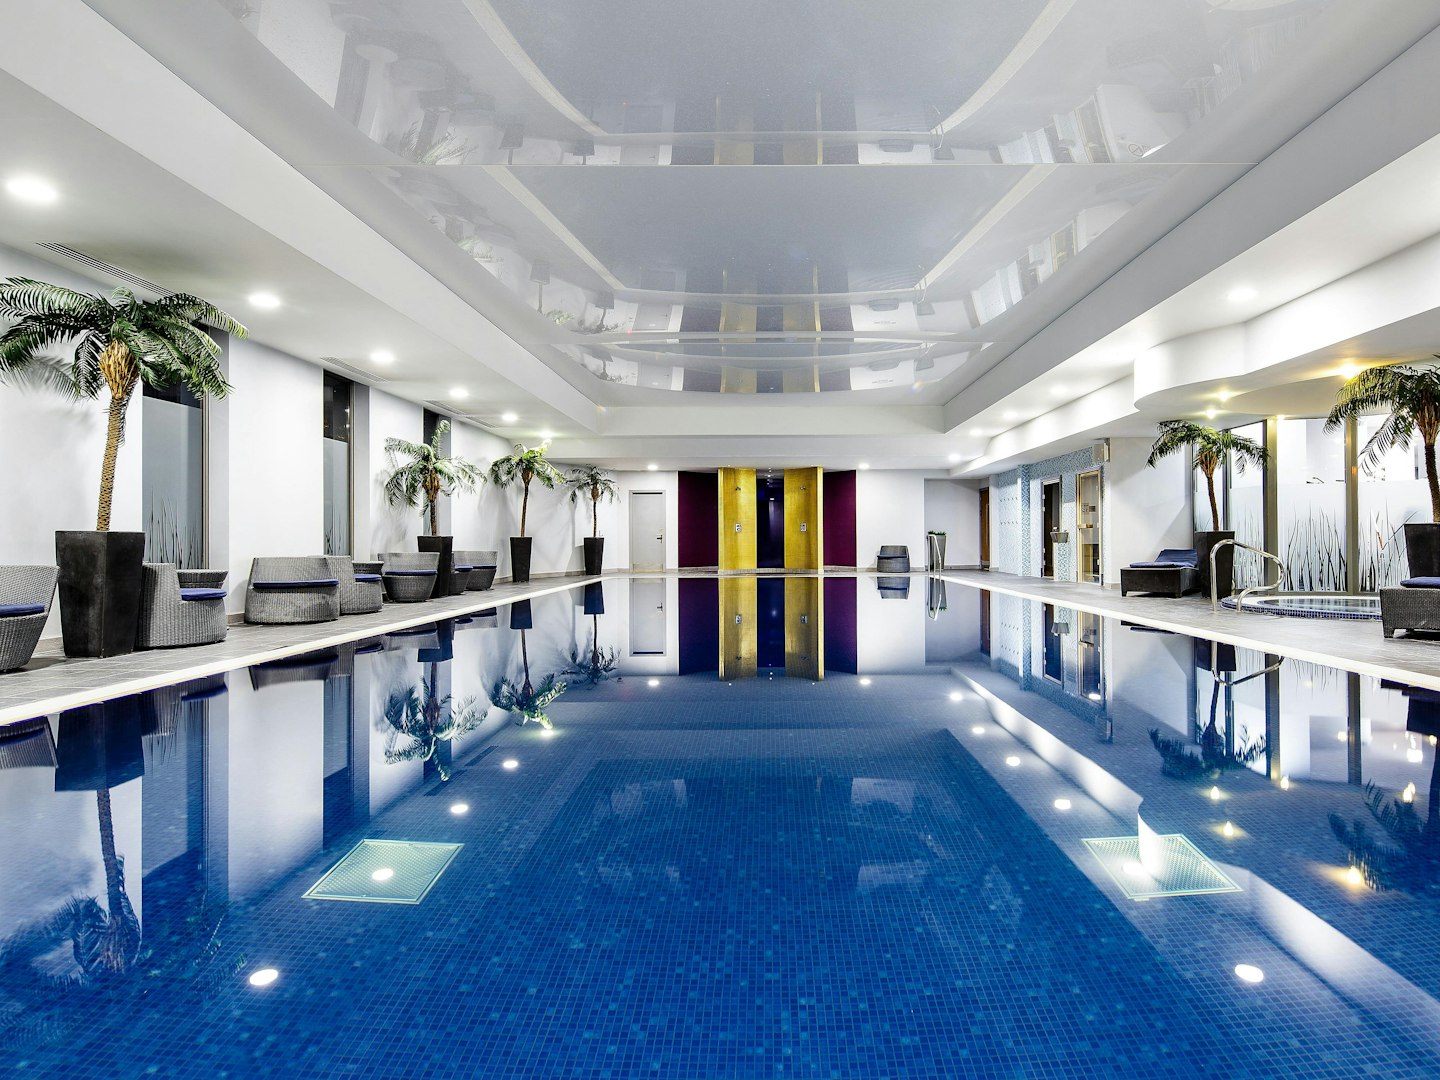 Top 10 Luxury Hotels with Swimming Pools | Indoor Swimming Pool